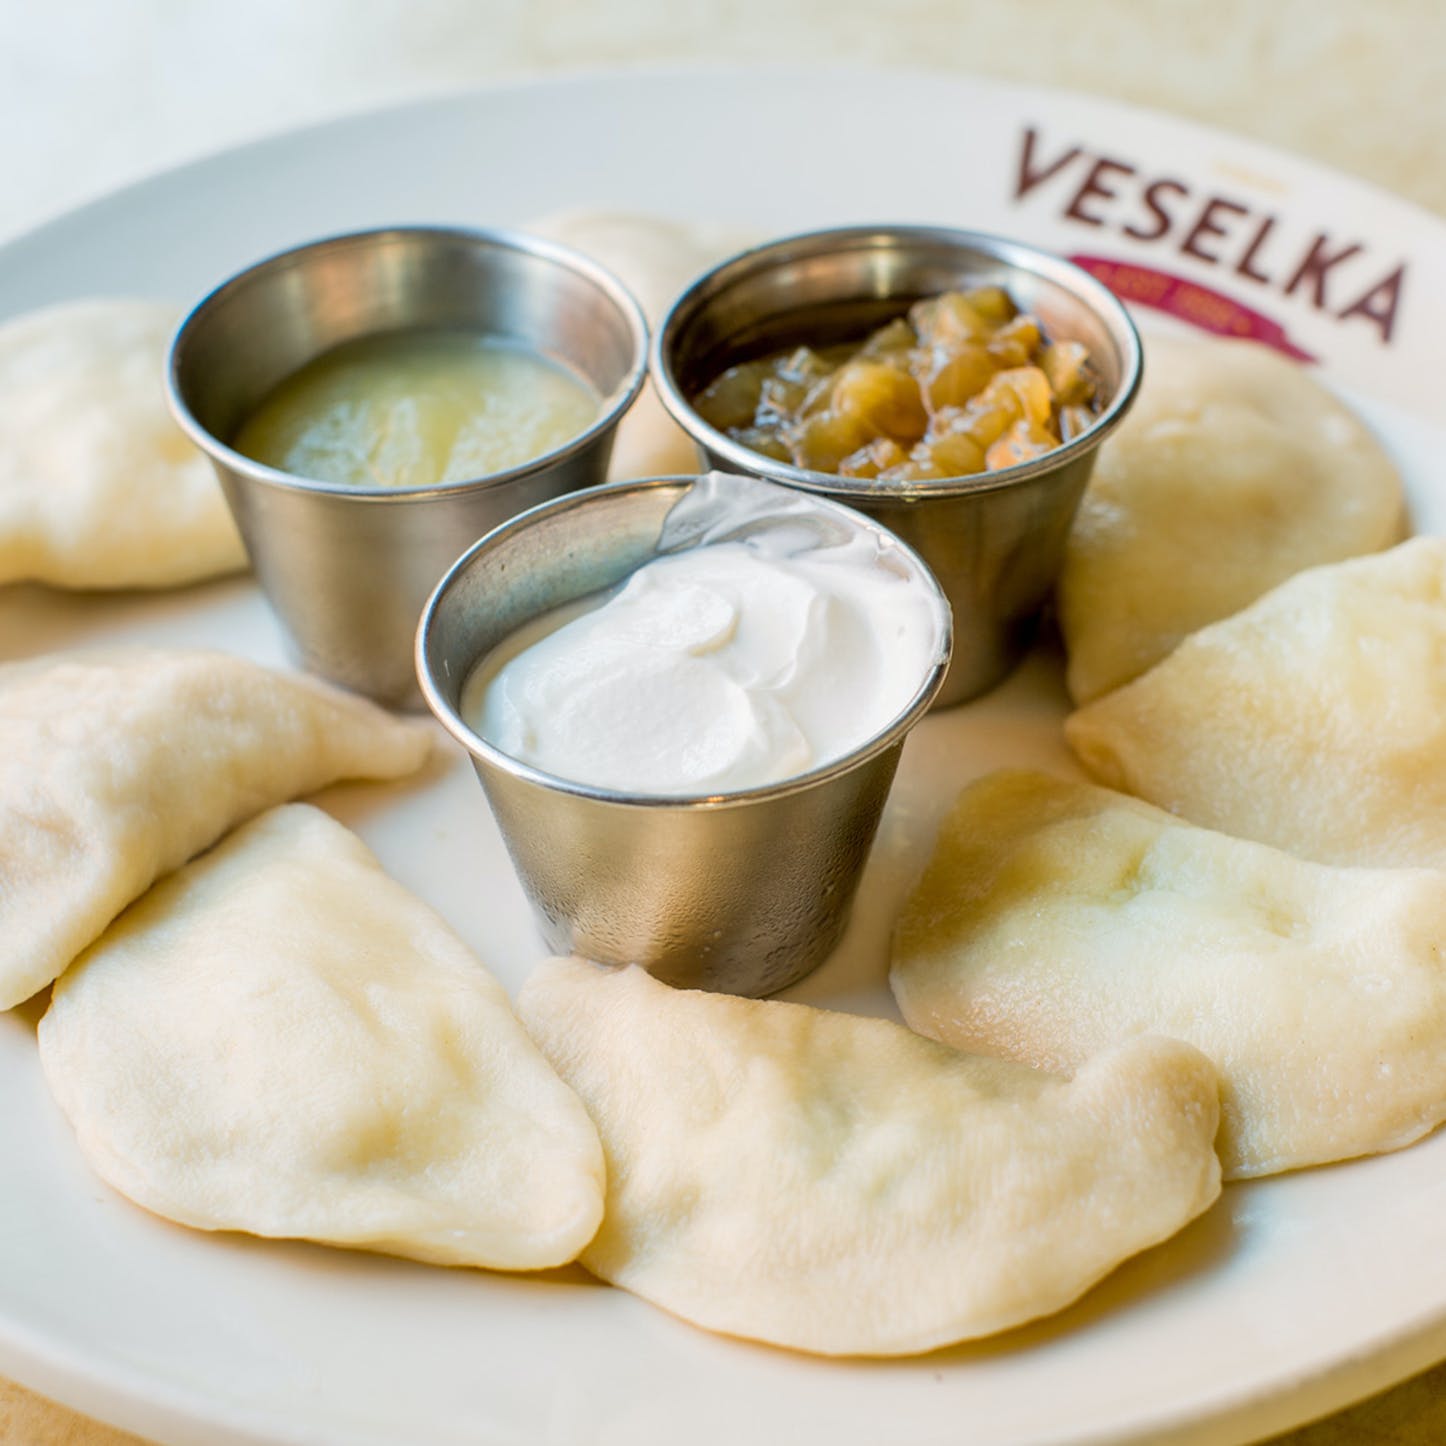 Best NYC food gifts: Veselka pierogis delivers! Iconic!